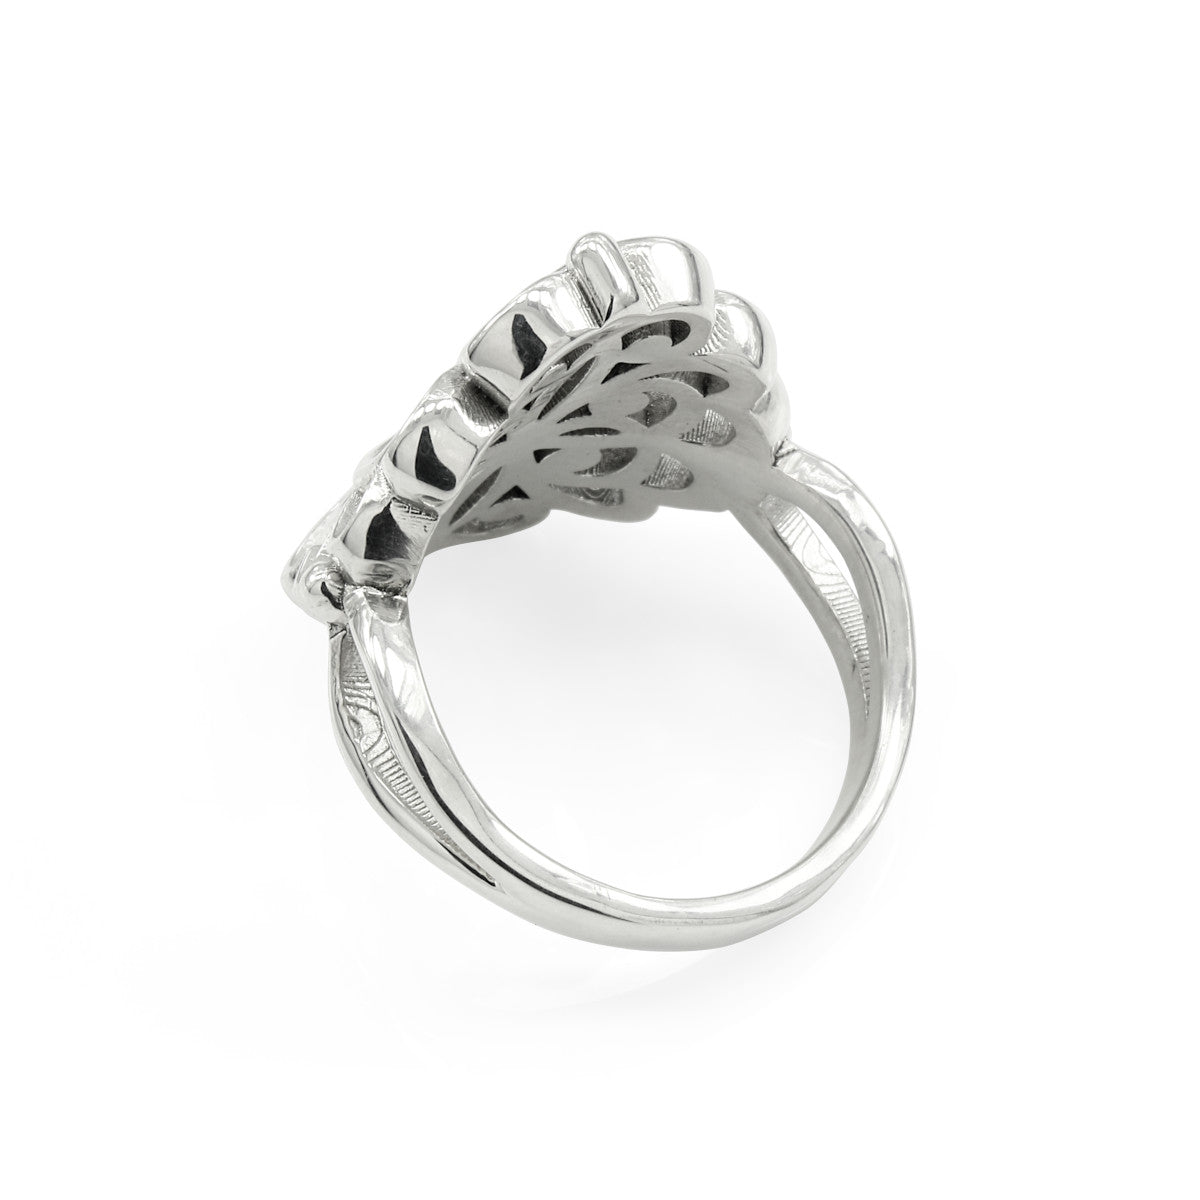 925 Sterling Silver Vintage Interweaving Style Ring